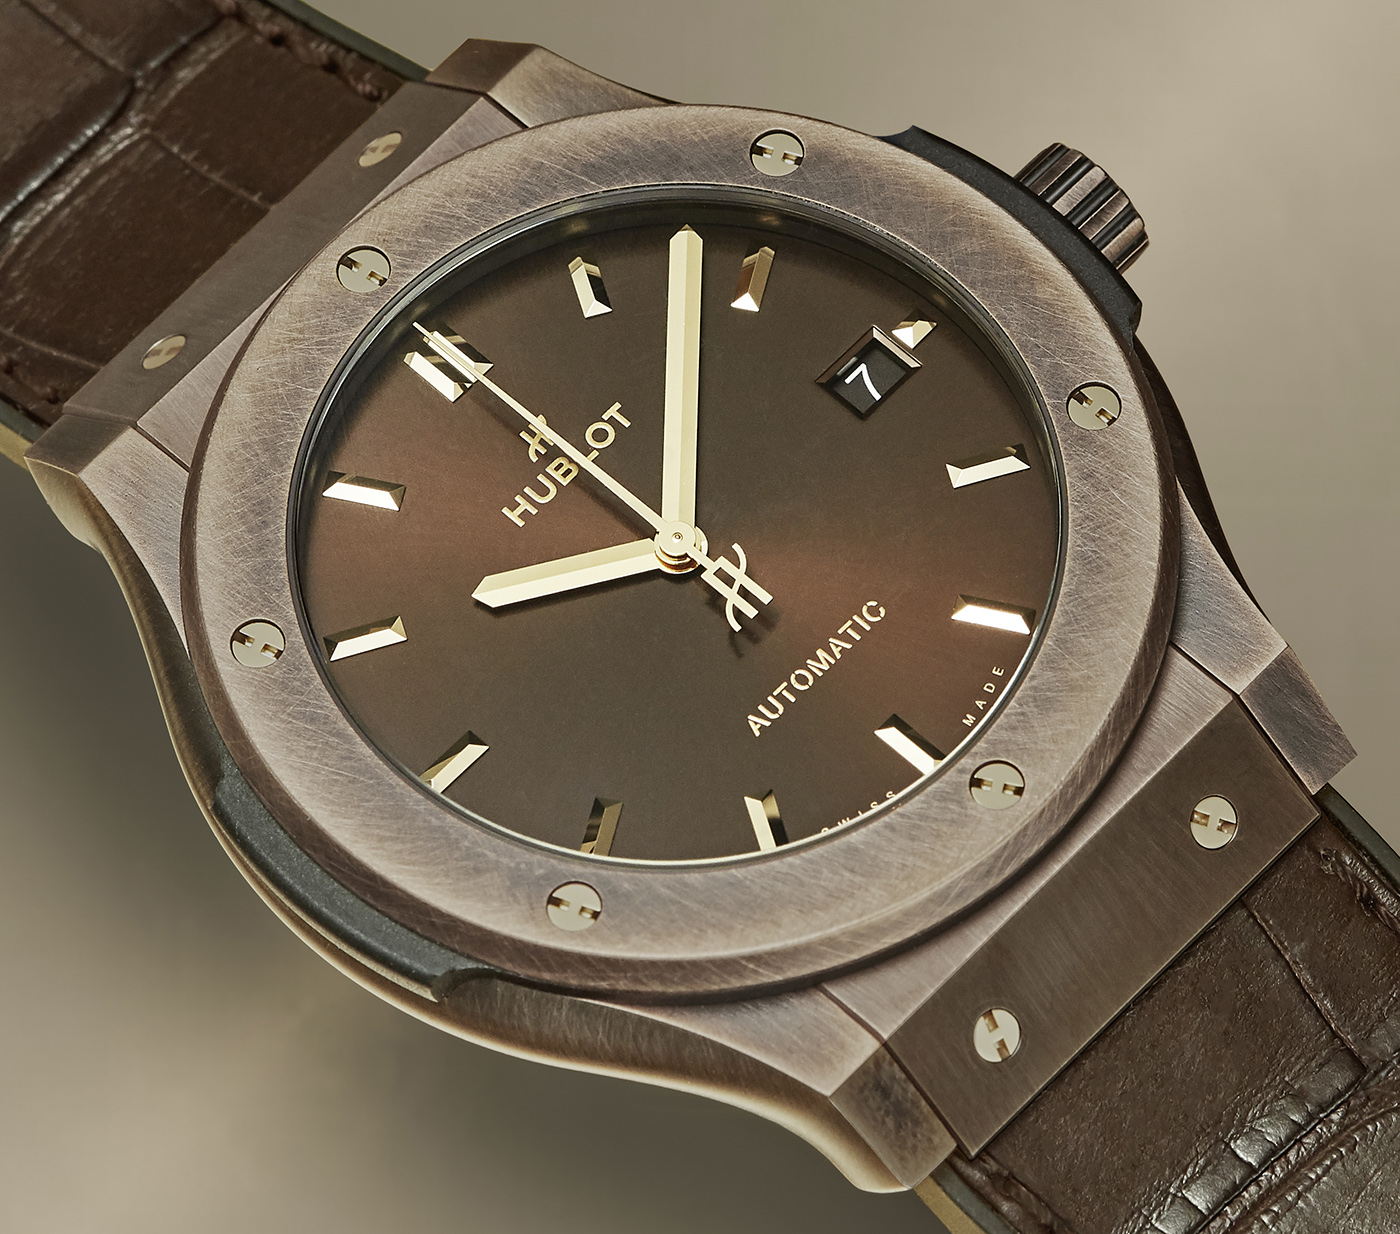 Hublot Debuts U.S.-Exclusive Limited-Edition 45mm Bronze Brown Watch aBlogtoWatch